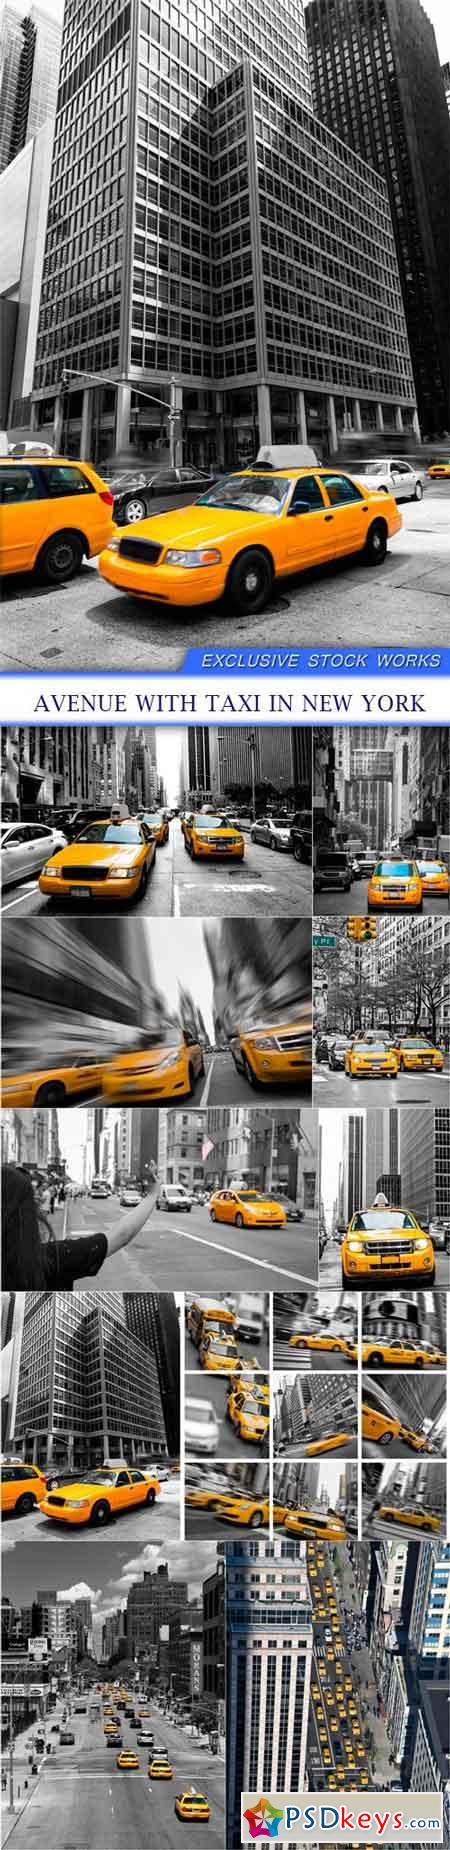 Avenue with taxi in New York 10X JPEG